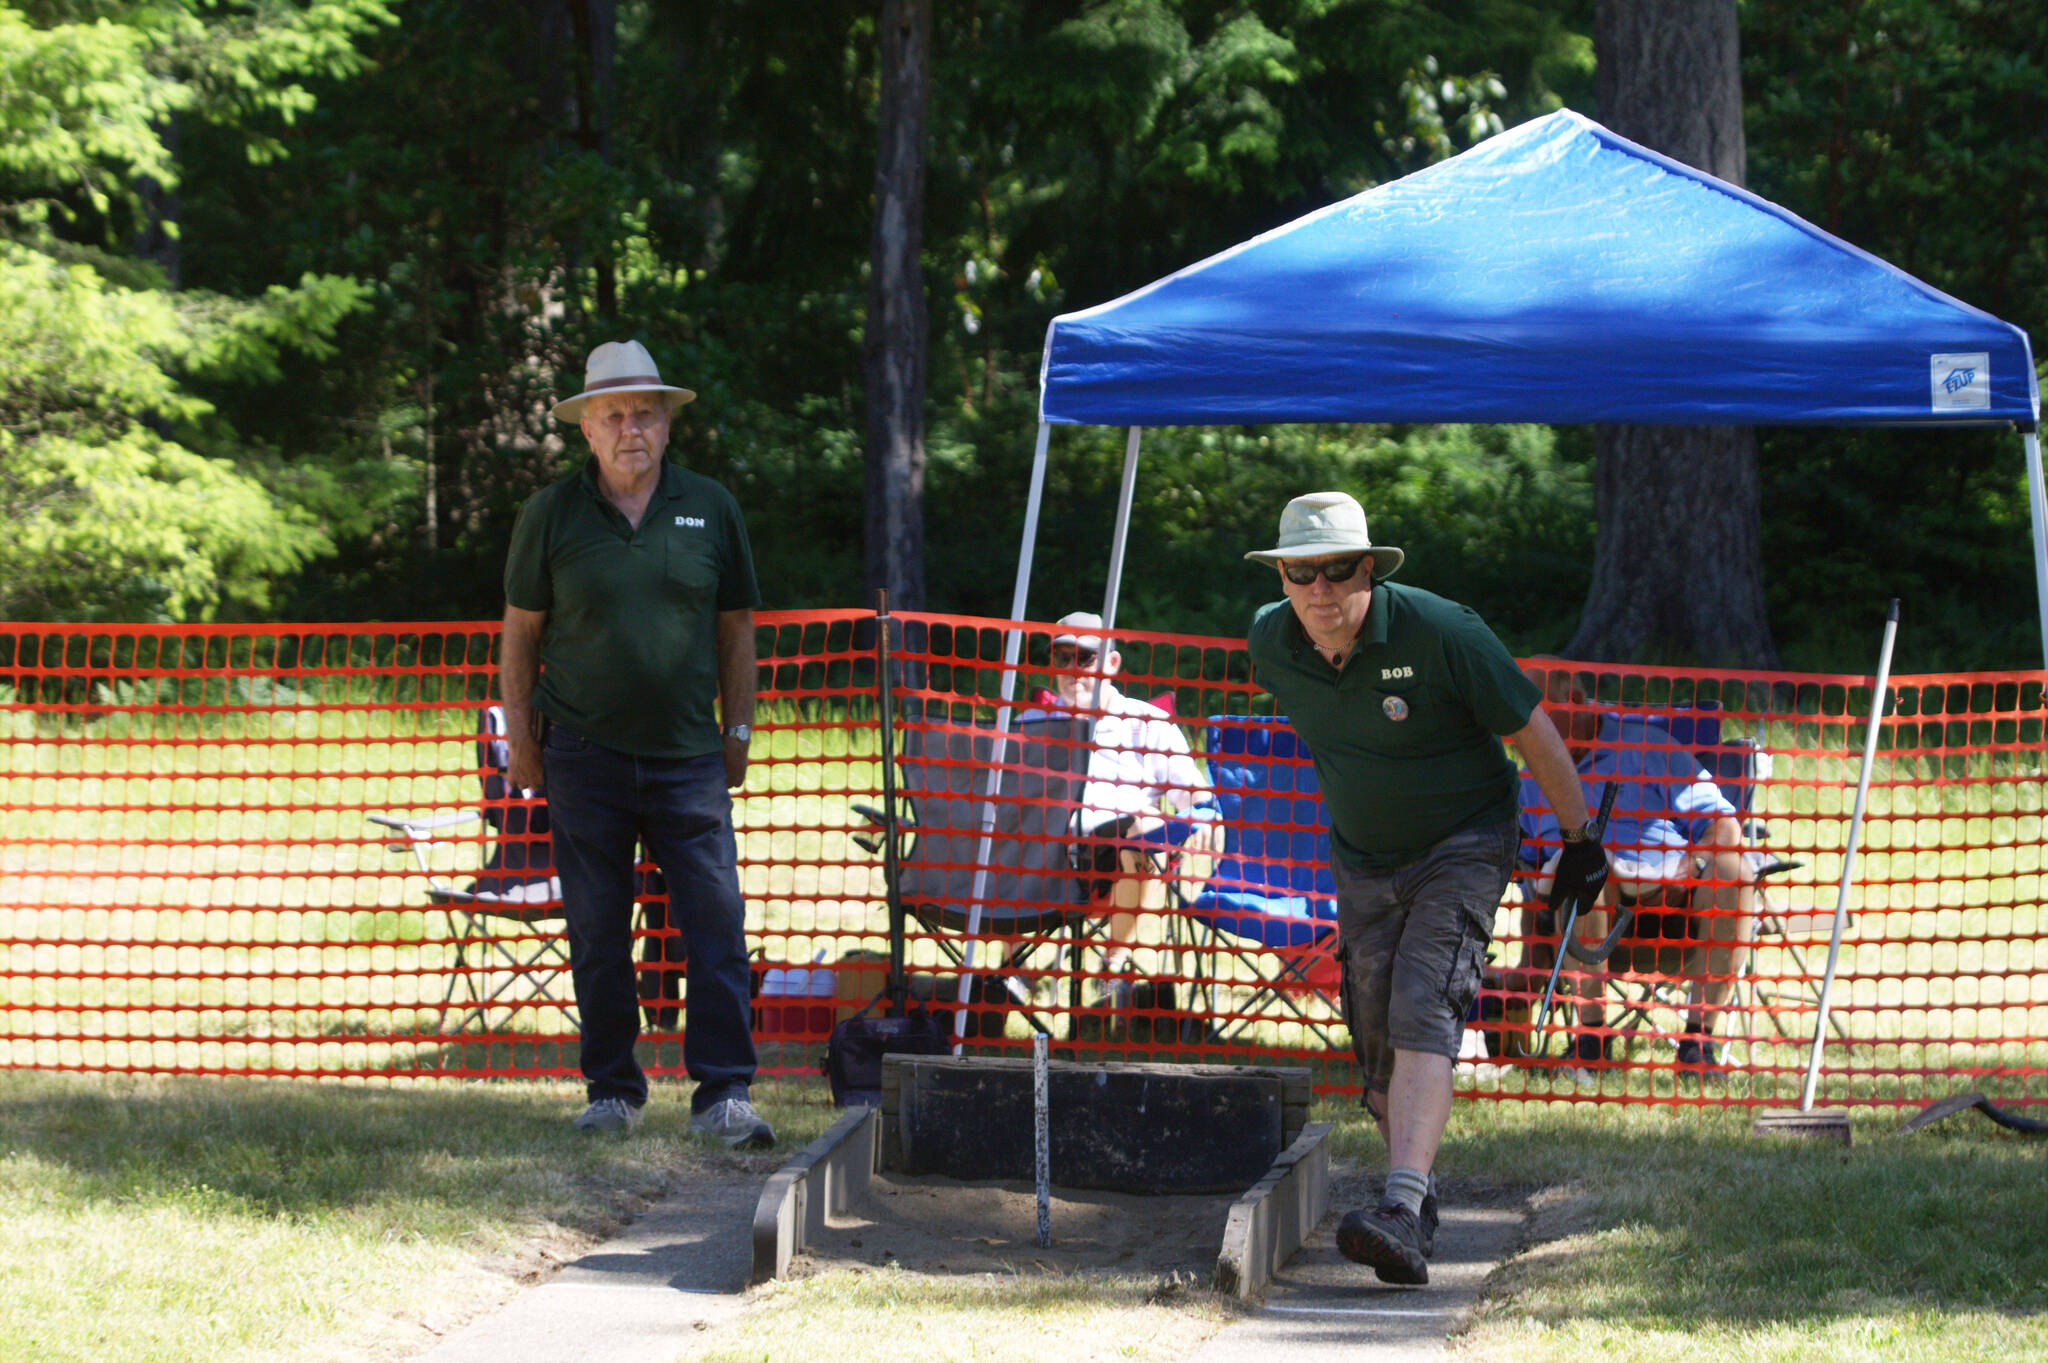 Two gentlemen compete in a game of horseshoes at South Kitsap Regional Park.